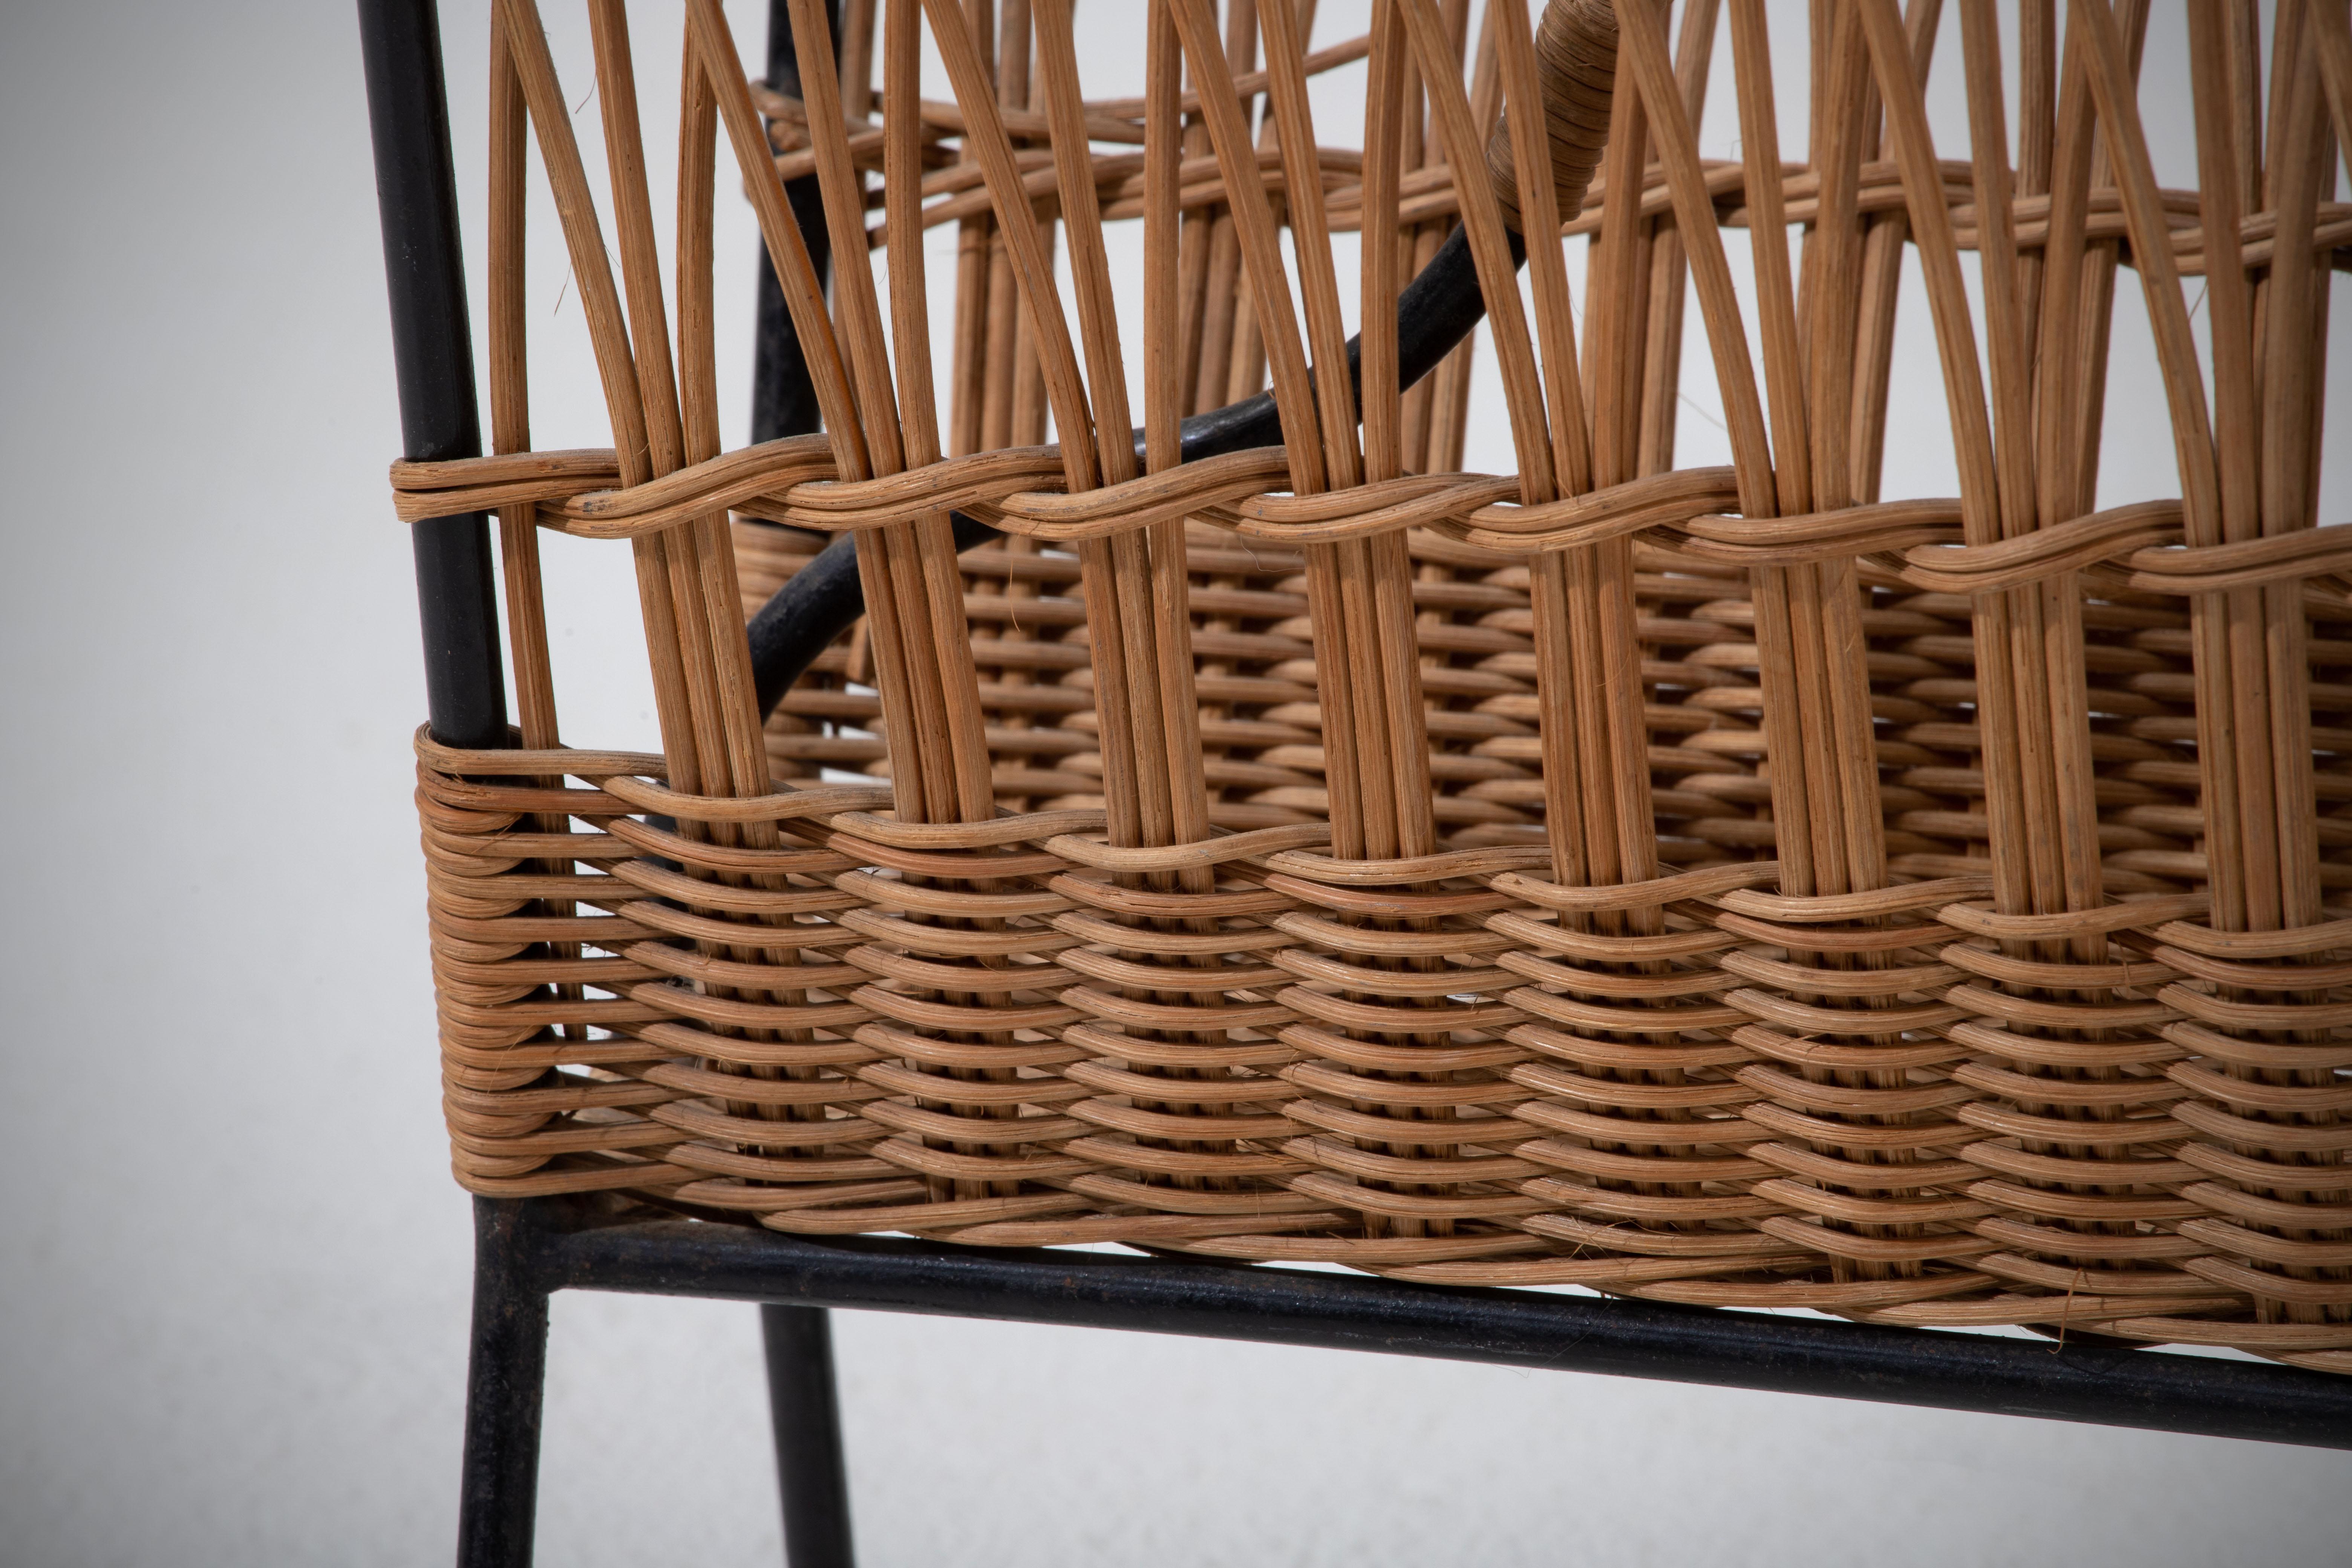 Jacques Adnet Wicker Magazine Rack with Black Iron Frame, Brass Ball Feet, 1950s For Sale 4